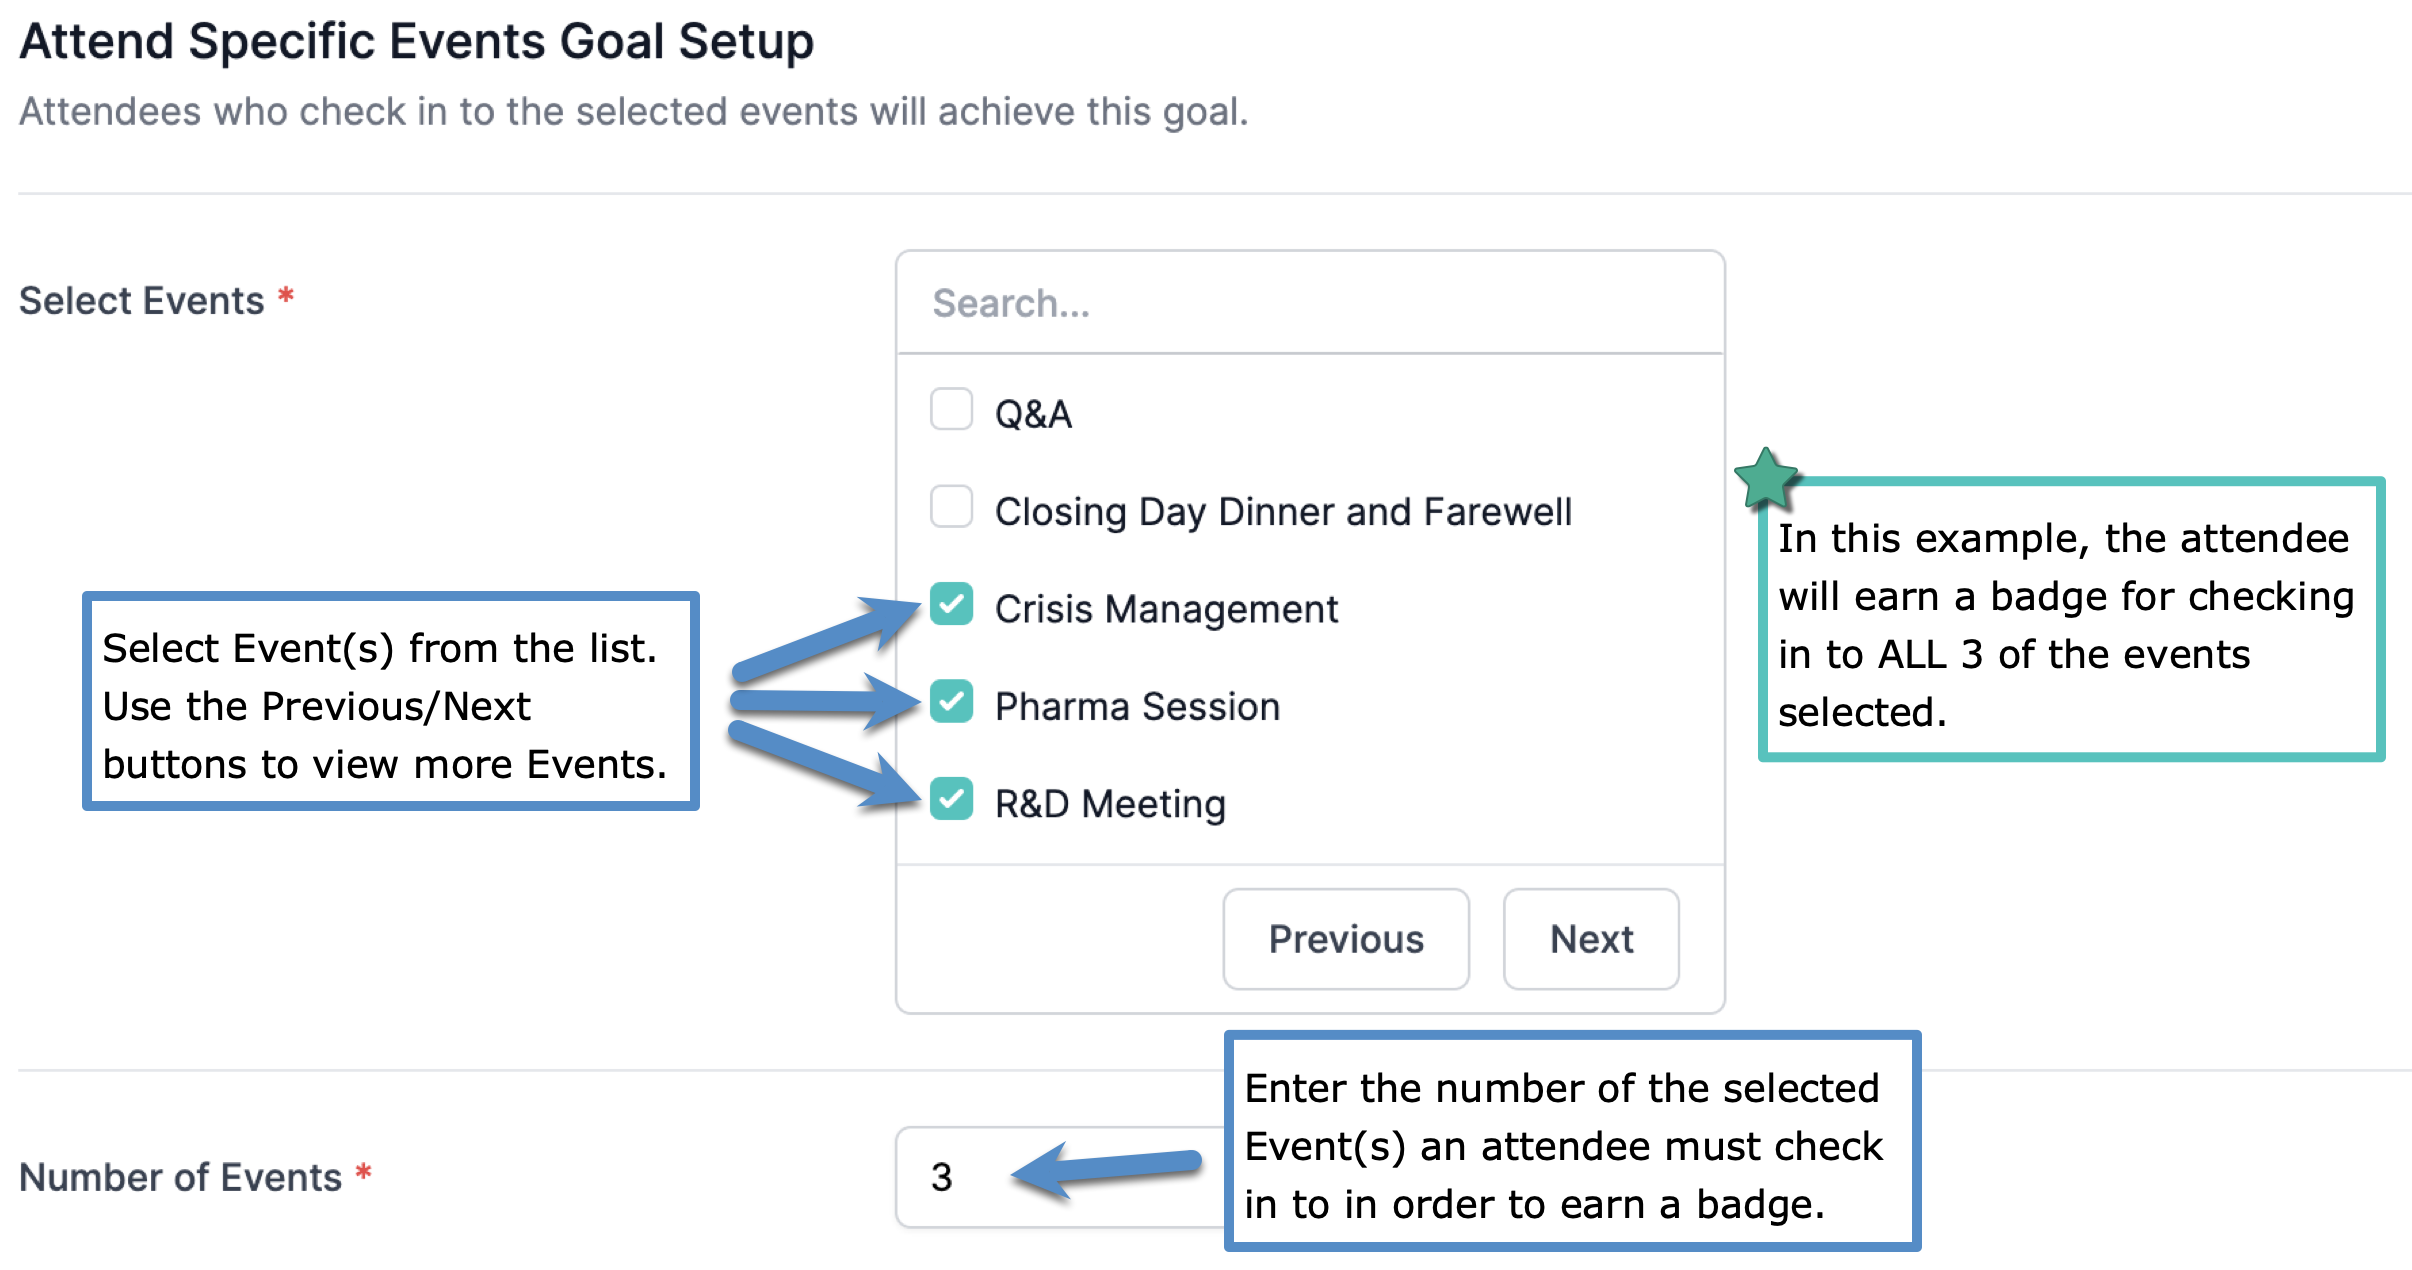 Attend_Specific_Events_Goal_Setup.png